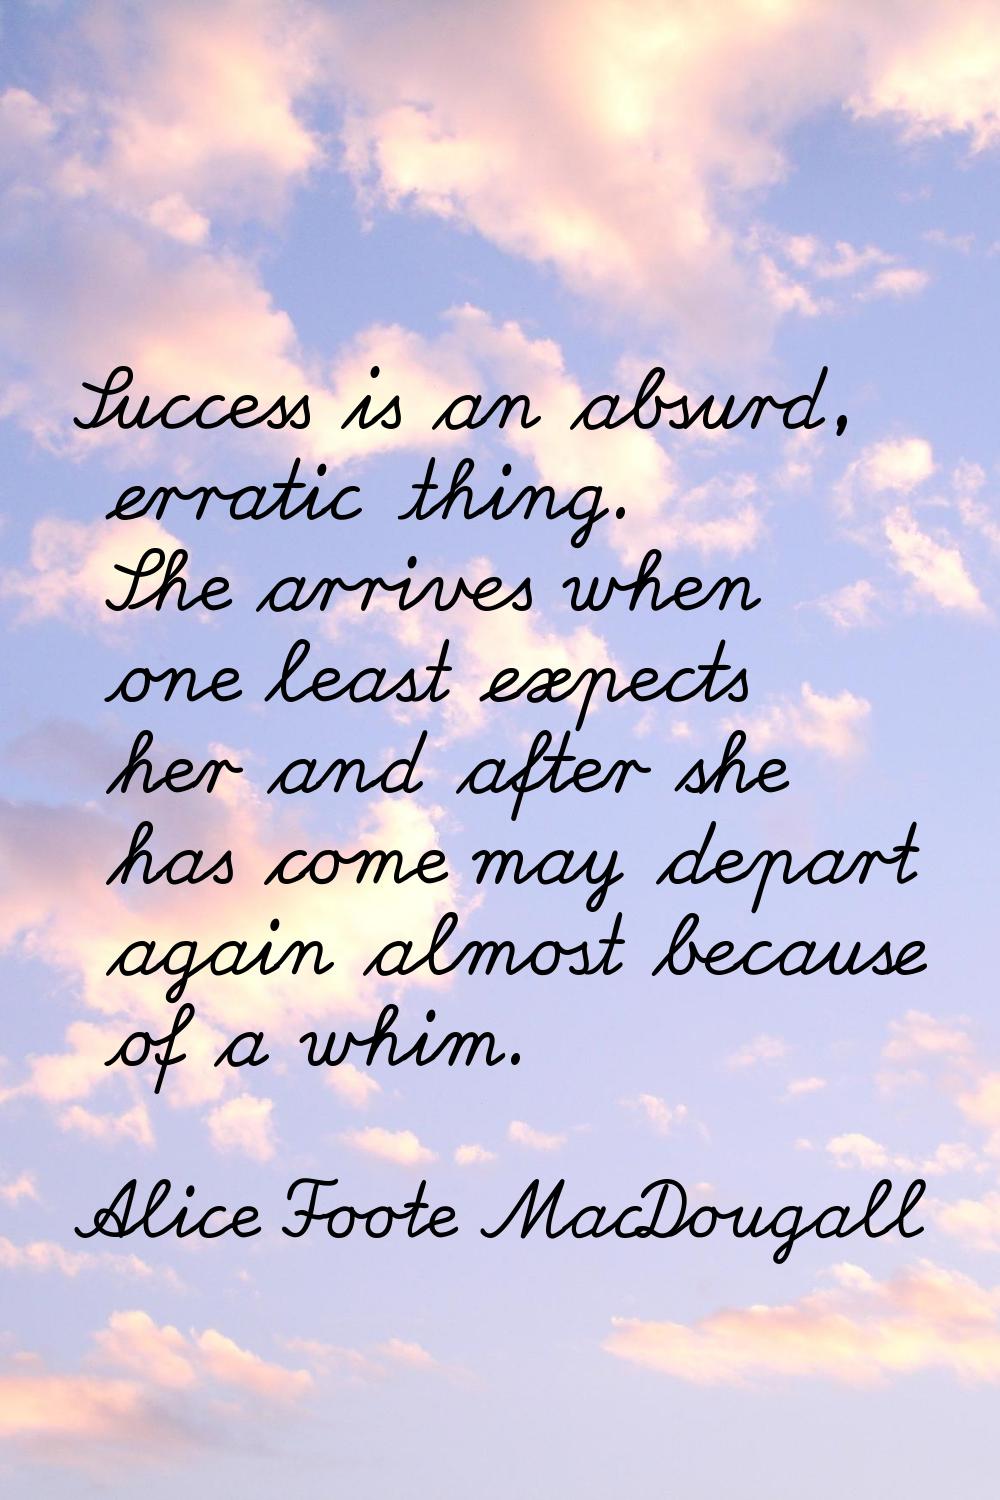 Success is an absurd, erratic thing. She arrives when one least expects her and after she has come 